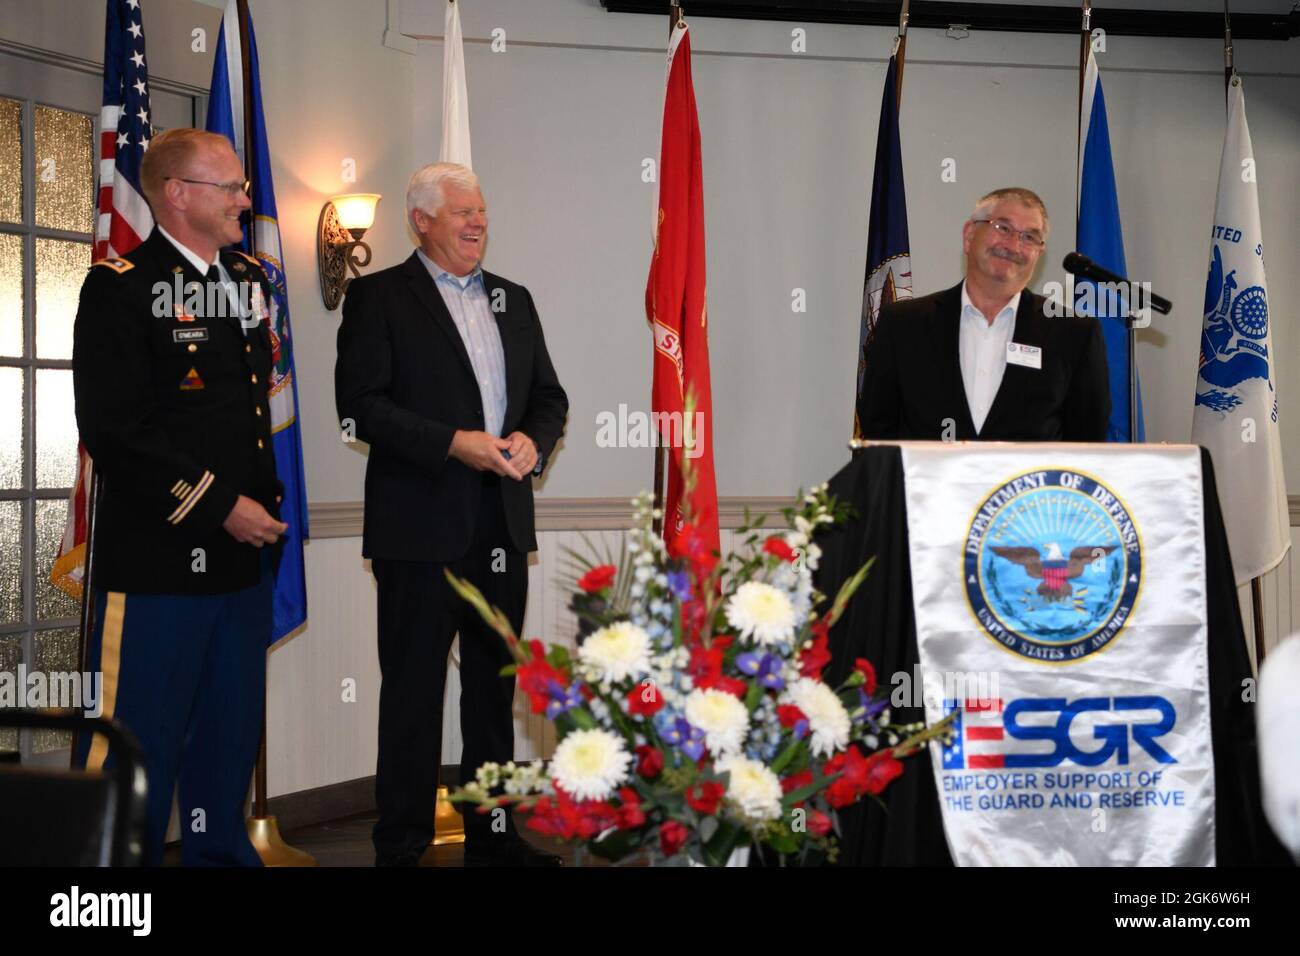 Community members, leaders, members of the Minnesota Committee for Employer Support of the Guard and Reserve (ESGR) and Minnesota National Guard gather August 18, 2021 in Willmar, Minnesota to celebrate Minnesota's Marcus Construction for receiving the Secretary of Defense’s Employer Support Freedom Award for its outstanding support shown as an employer of members of the National Guard. This award was one of only 15 given to employers across the 54 states, territories and the District of Columbia in 2021.    “I am proud to salute the outstanding employers who have earned the distinction of bei Stock Photo